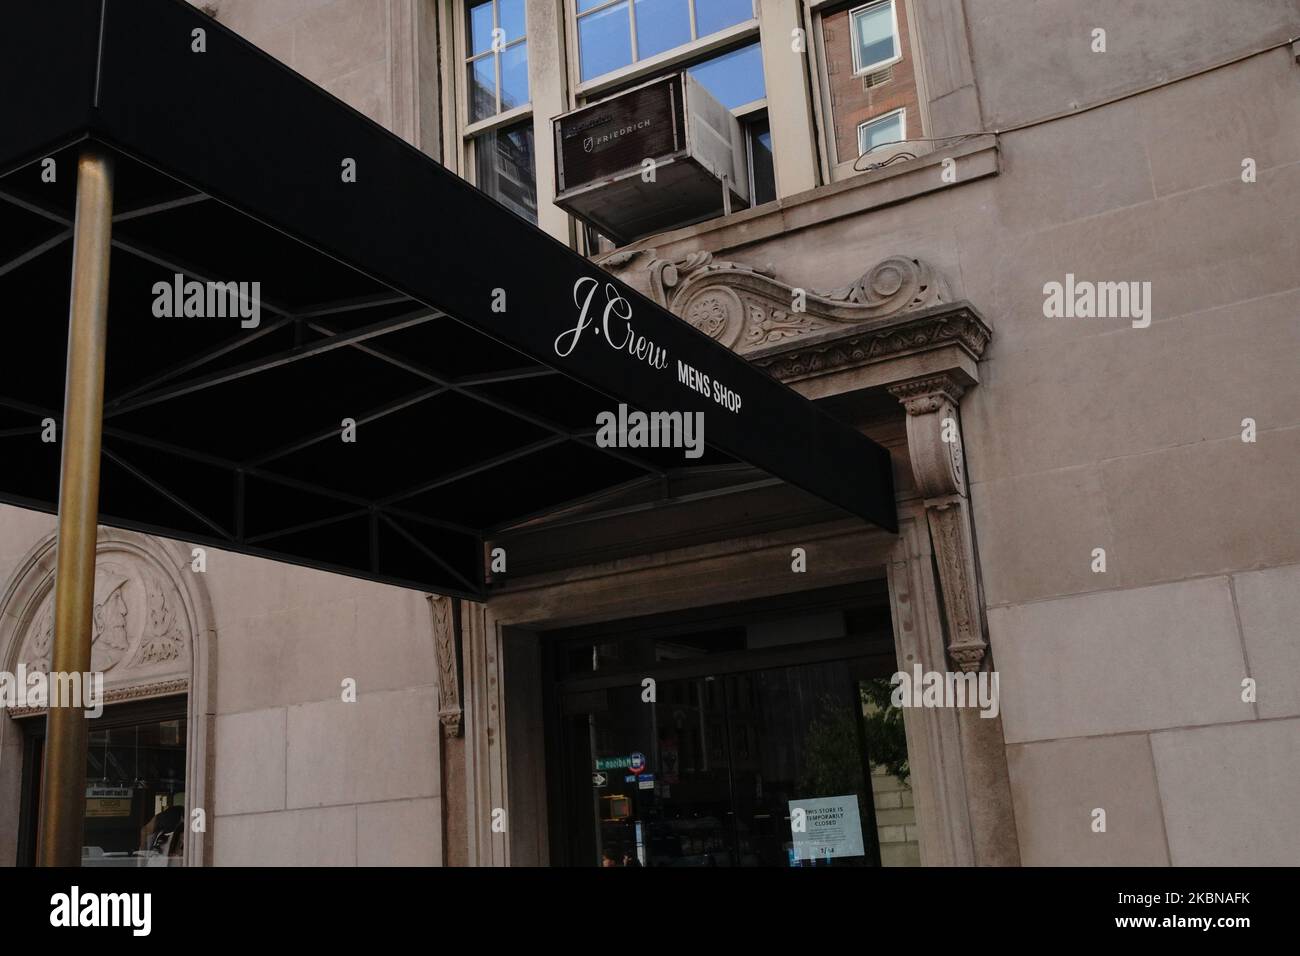 A view of a J. Crew men’s shop along Madison Avenue during coronavirus pandemic on May for 2020. J. Crew, the preppy clothing company whose products were famously worn by Michelle Obama, filed for bankruptcy protection on Monday. (Photo by John Nacion/NurPhoto) Stock Photo